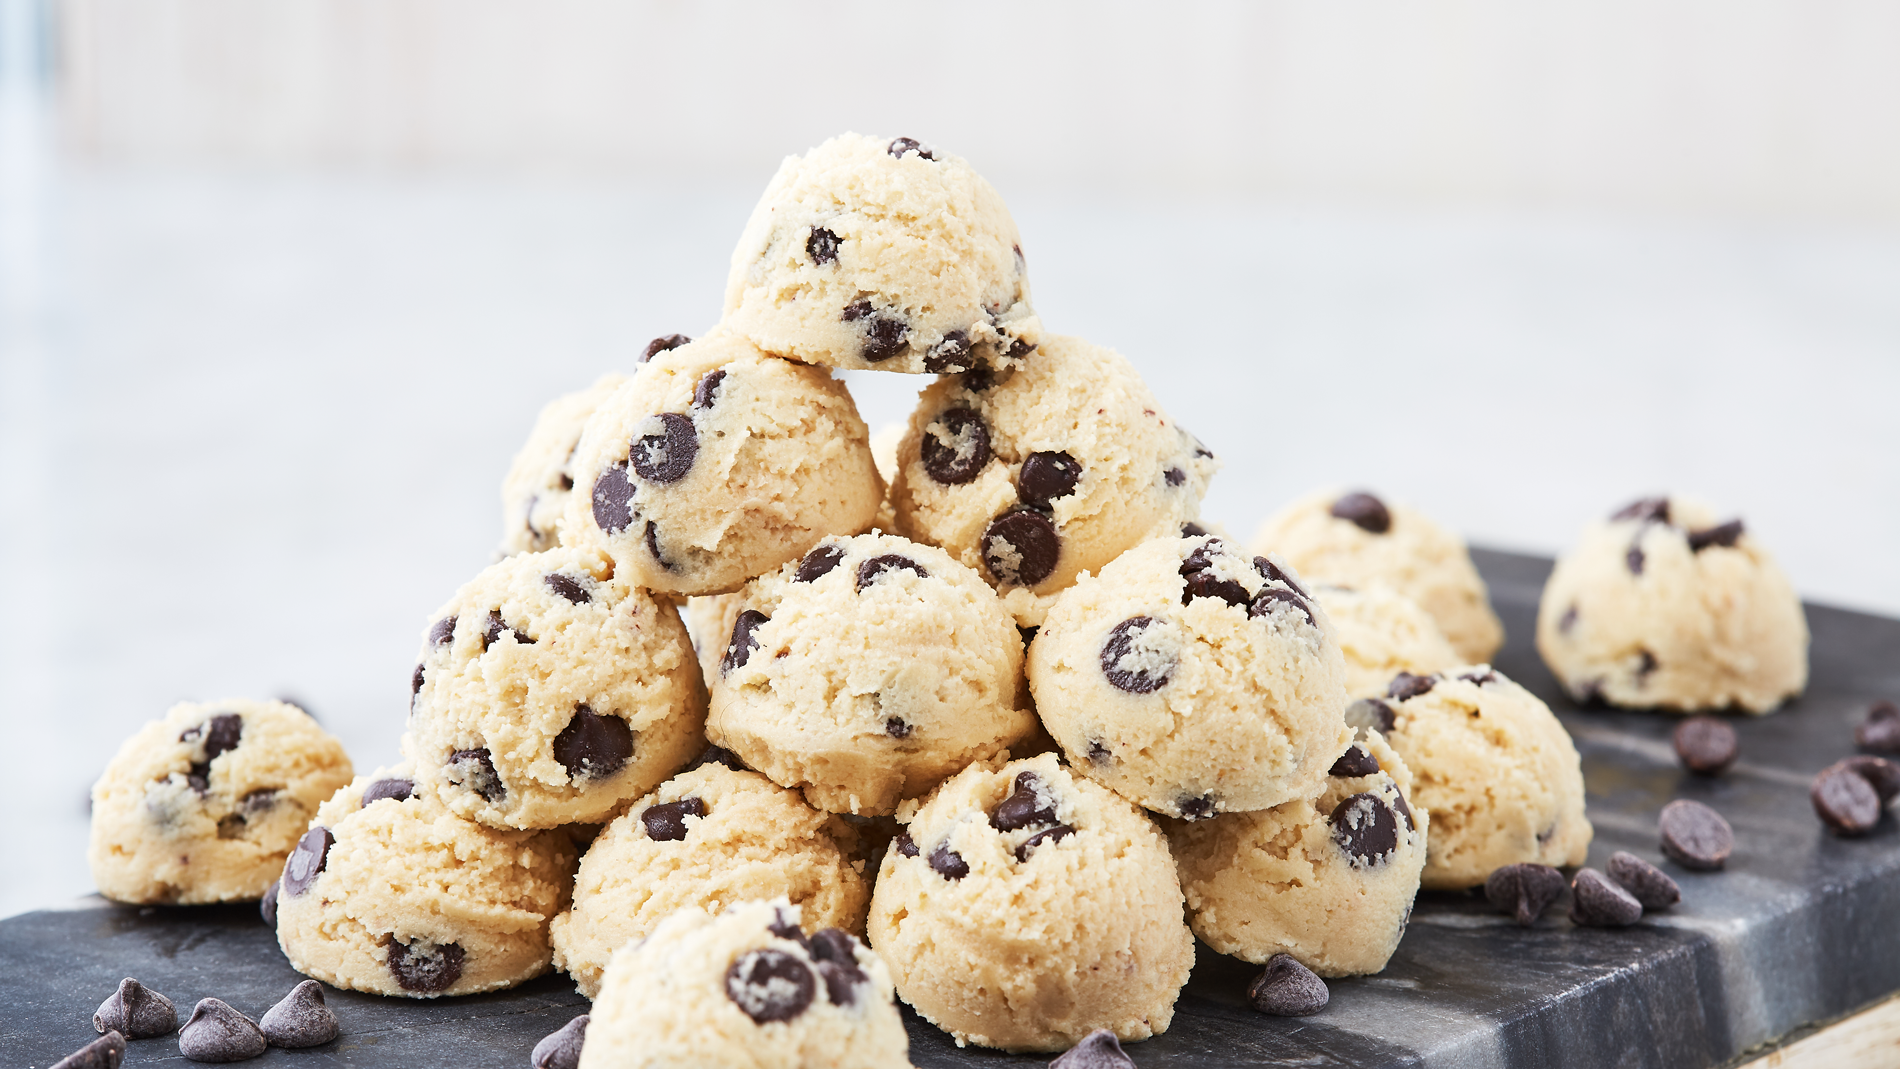 https://hips.hearstapps.com/hmg-prod/images/190412-chocolate-chip-keto-fat-bombs-horizontal-1556199792.png?crop=1xw:0.8435280189423836xh;center,top